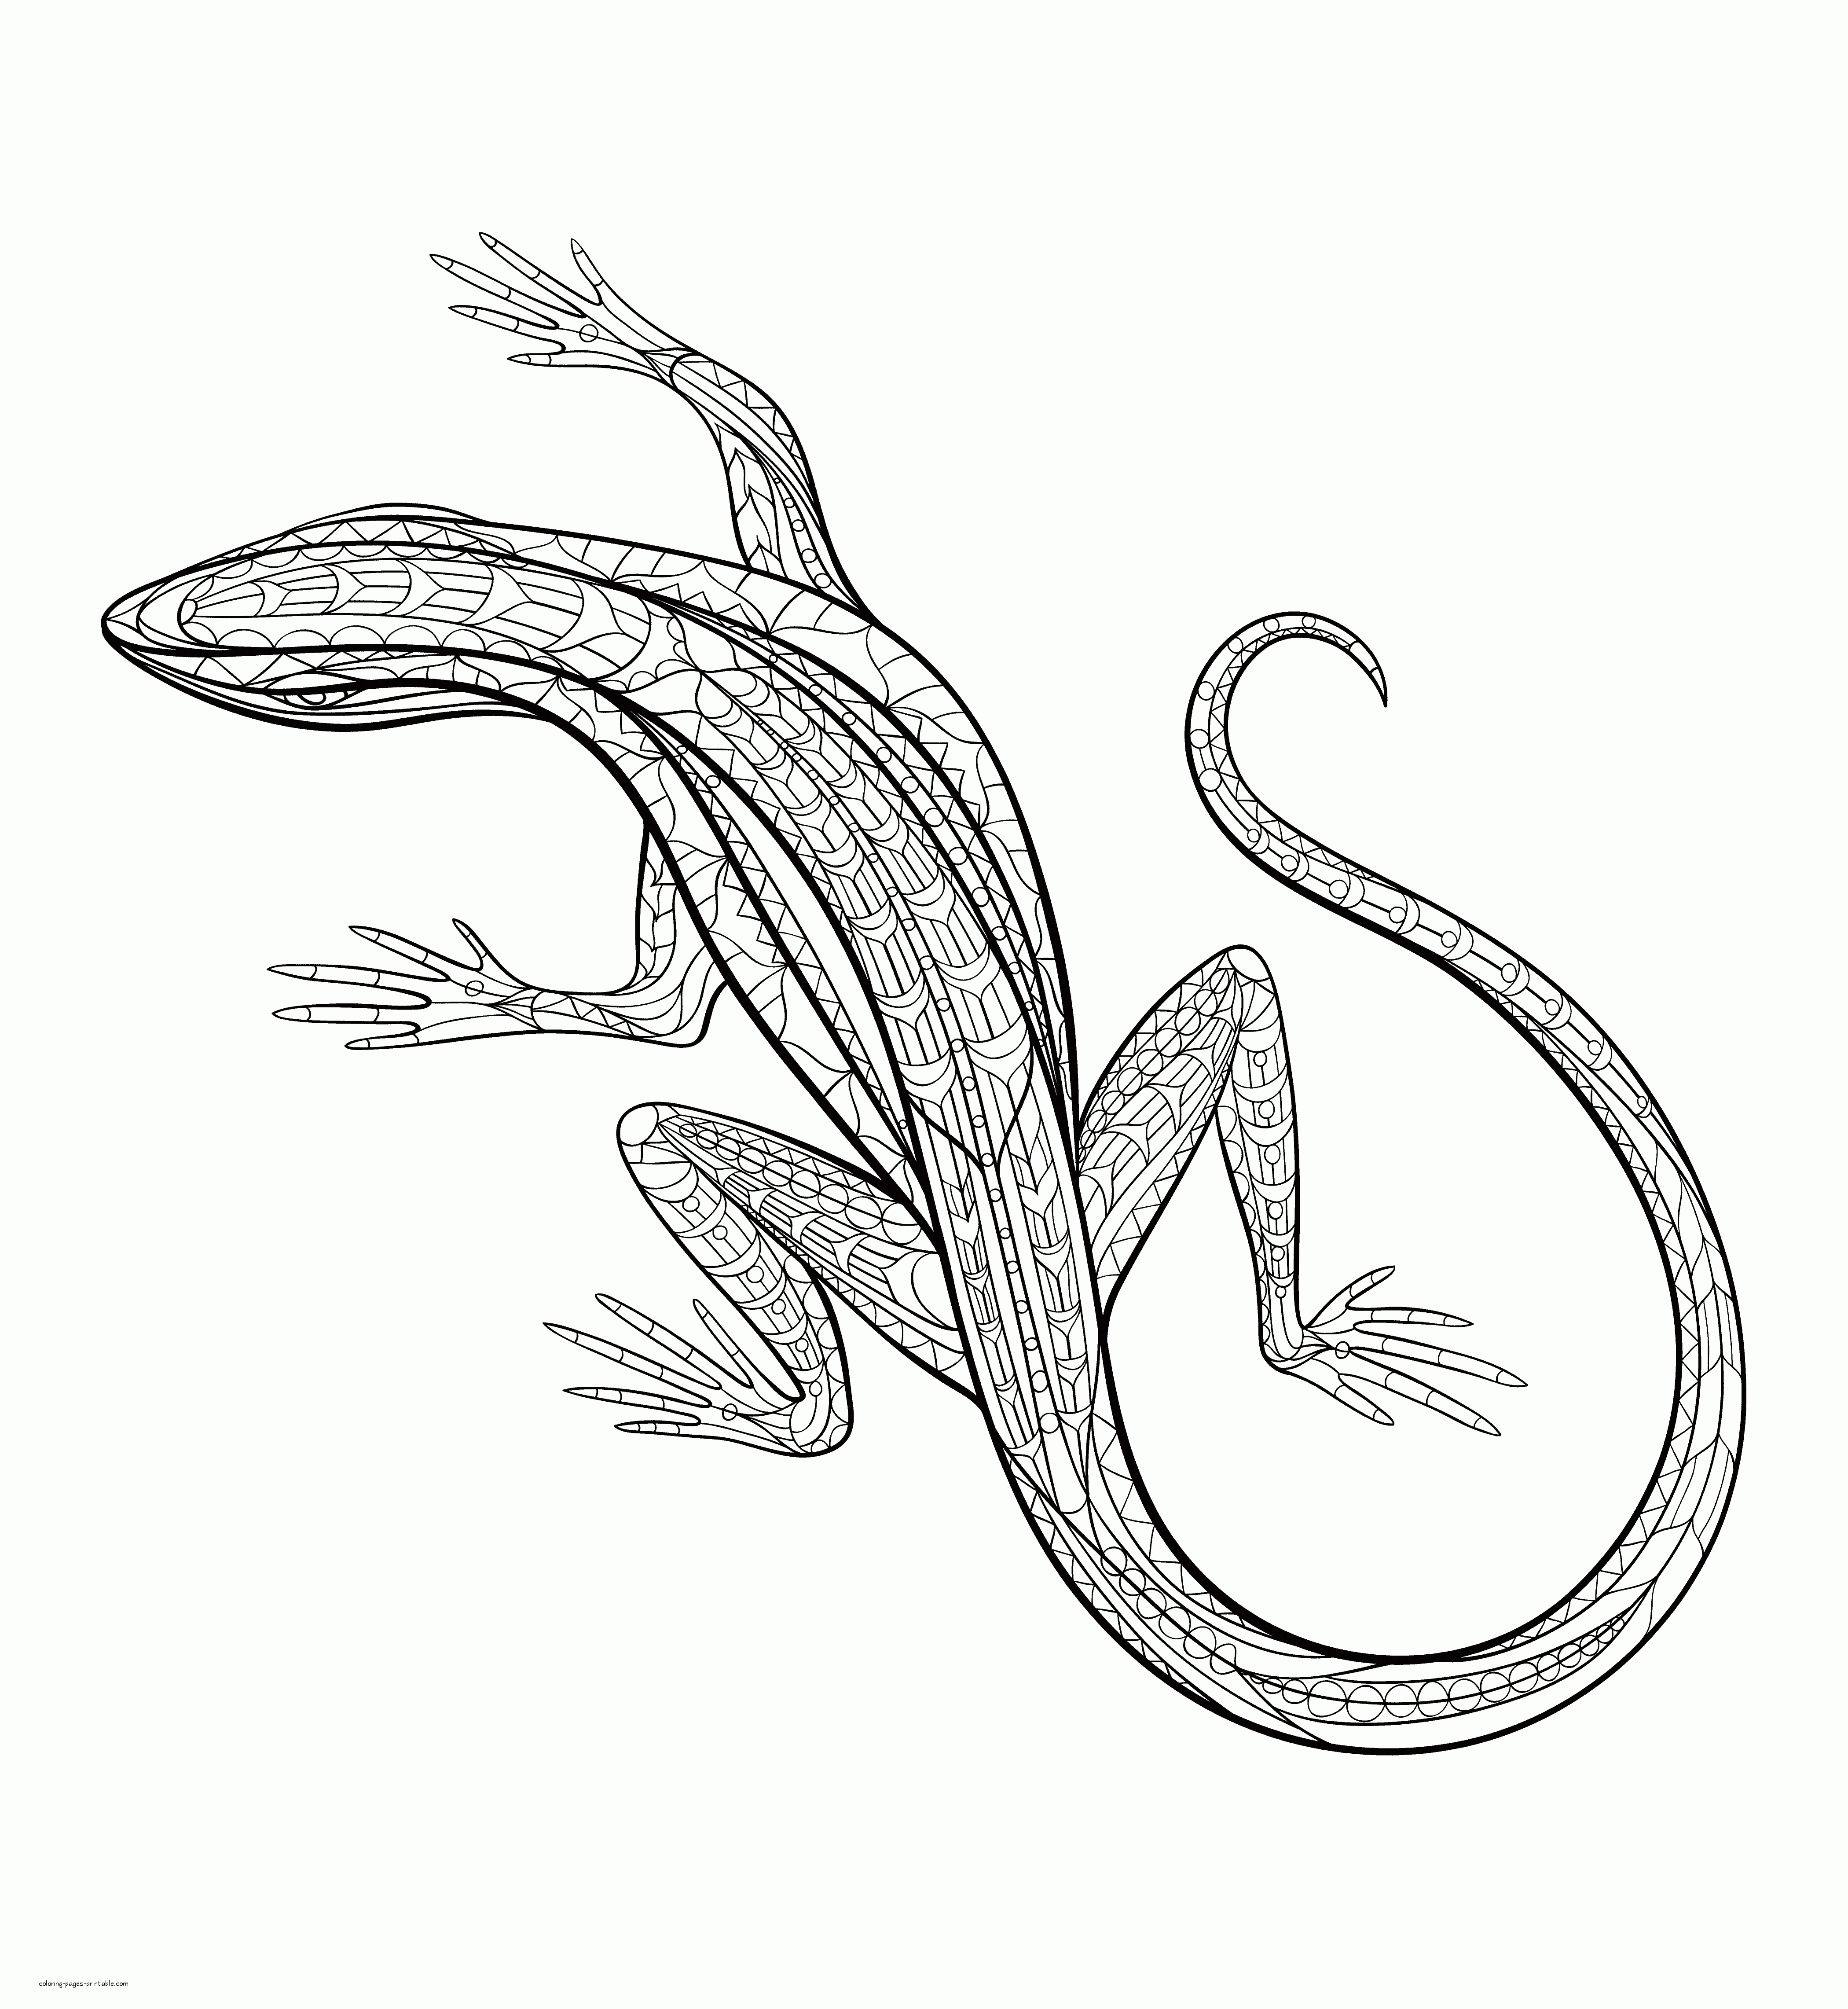 Lizard. Animal Coloring Pages For Adults